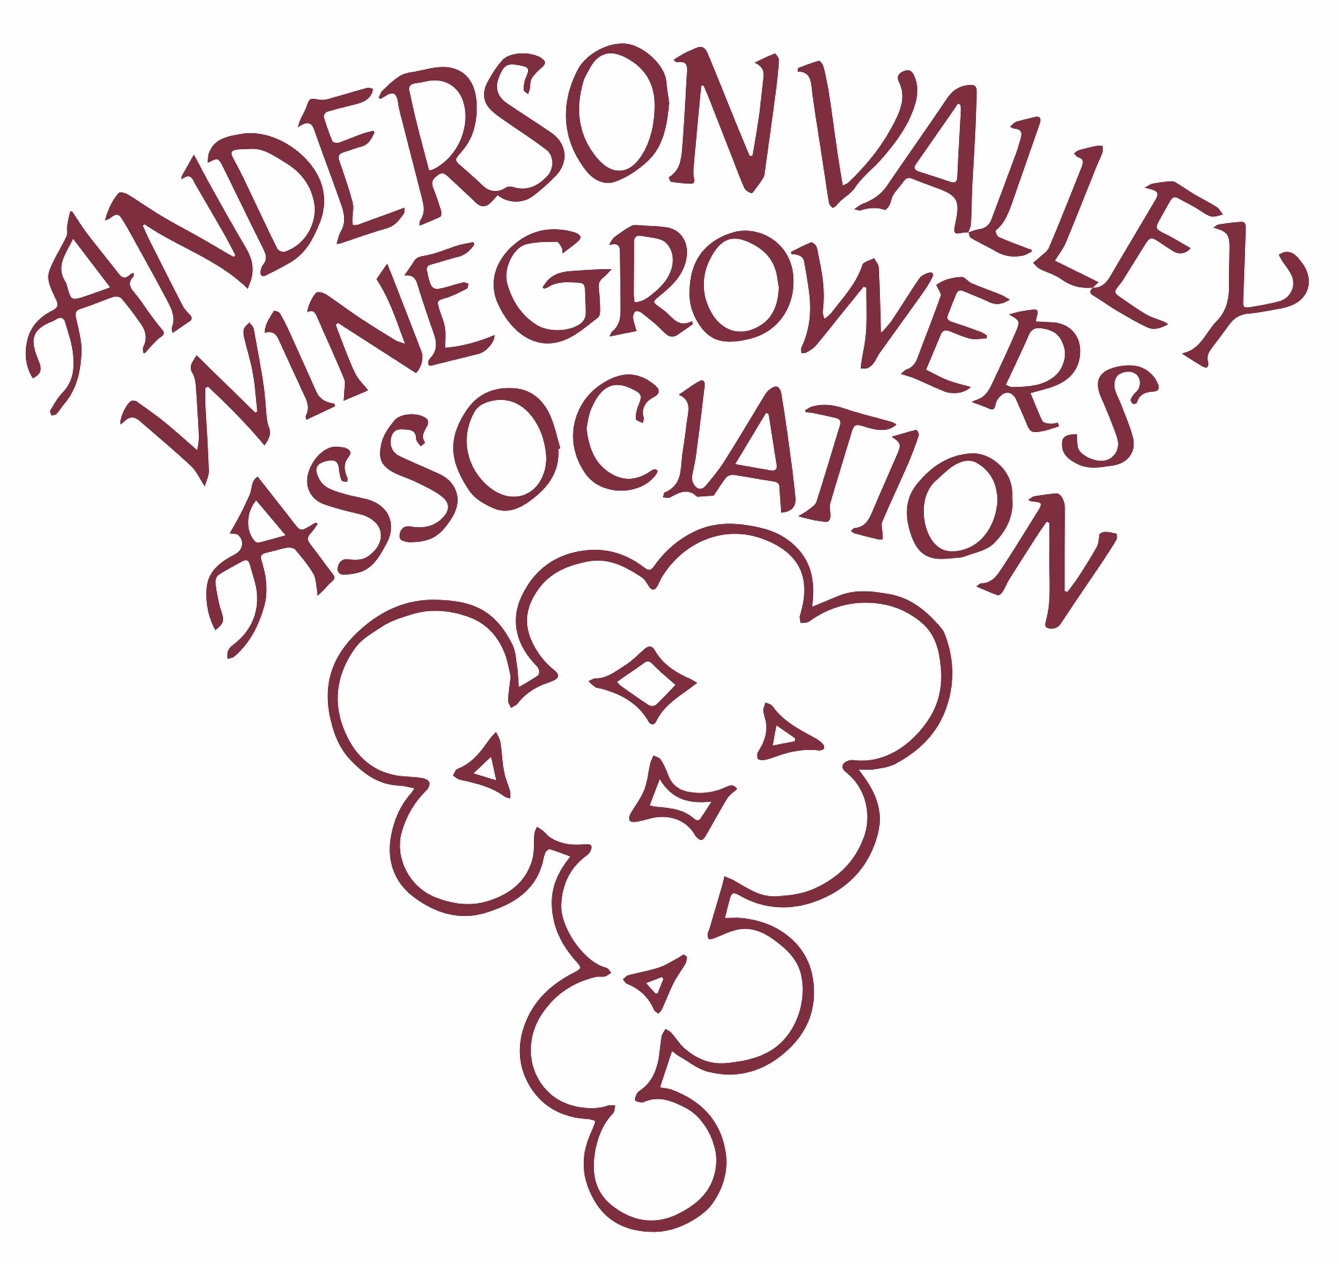 Anderson Valley Winegrowers logo